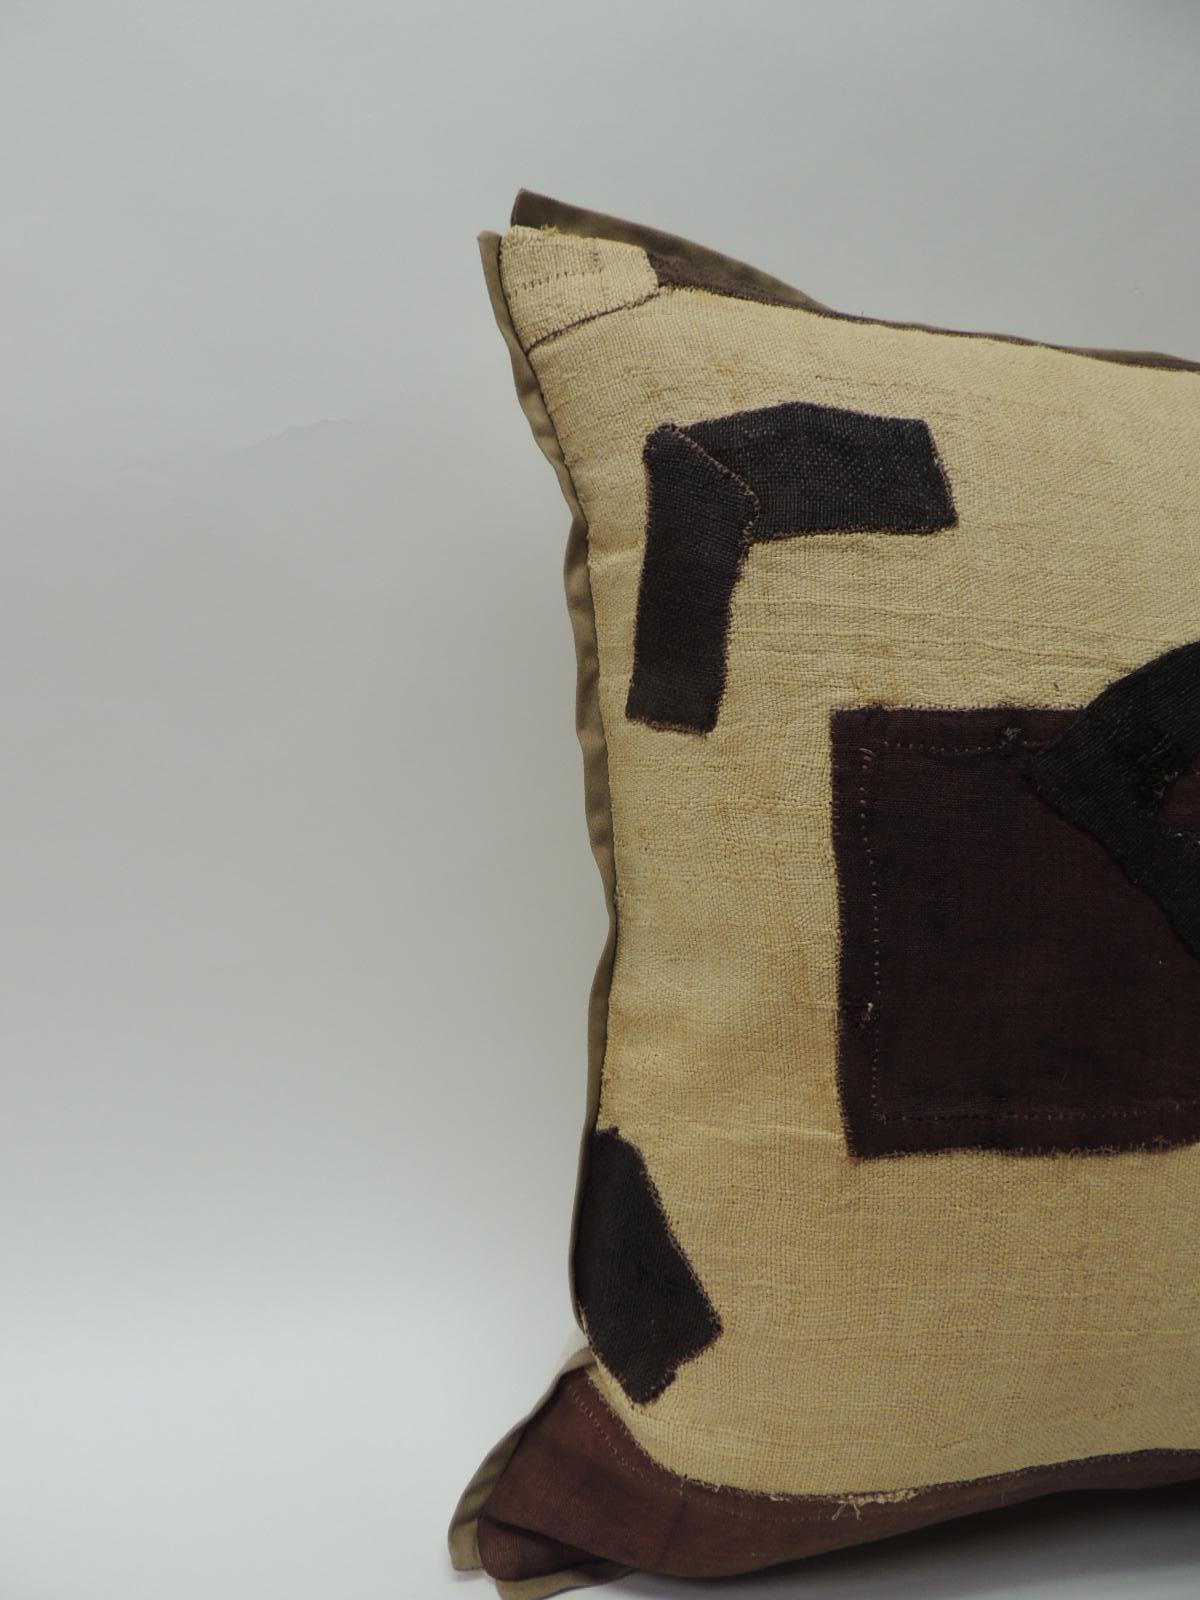 Applique raffia, patchwork and applique brown, black and natural decorative pillow,
custom flat cotton trim in earth-tone khaki color all around. Natural cotton and linen backing. Pillow handcrafted and designed in the USA with custom made